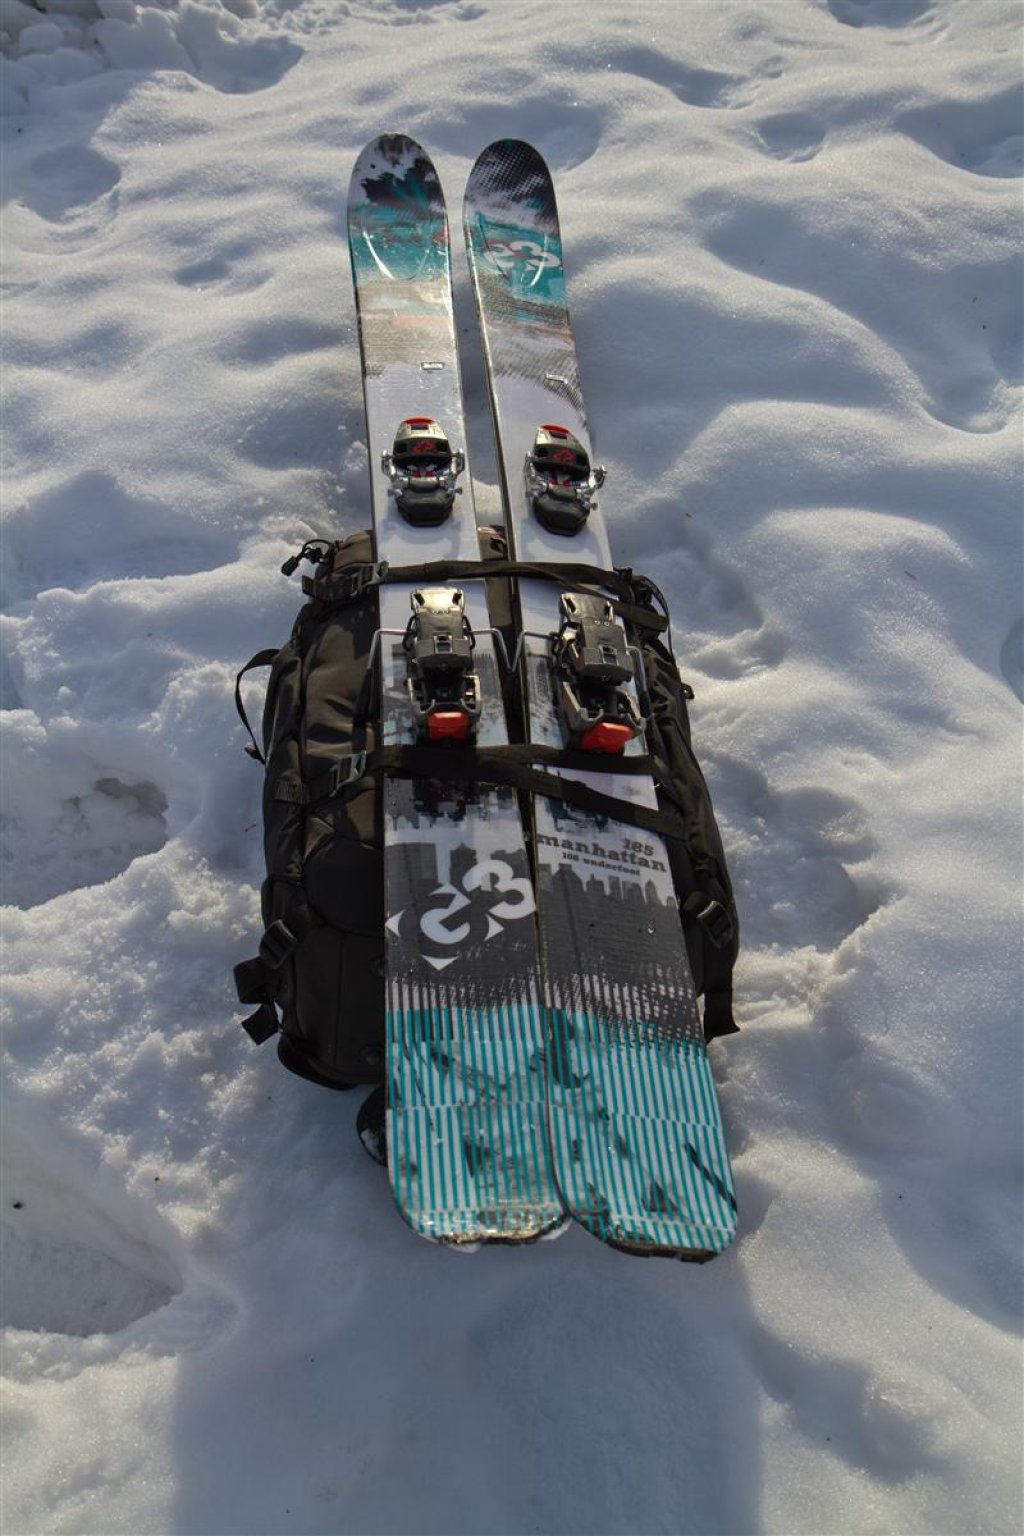 The front straps with side reinforcements as edge protection hold the board or skis perfectly. The EVOC-typical metal eyelets are stable and secure.